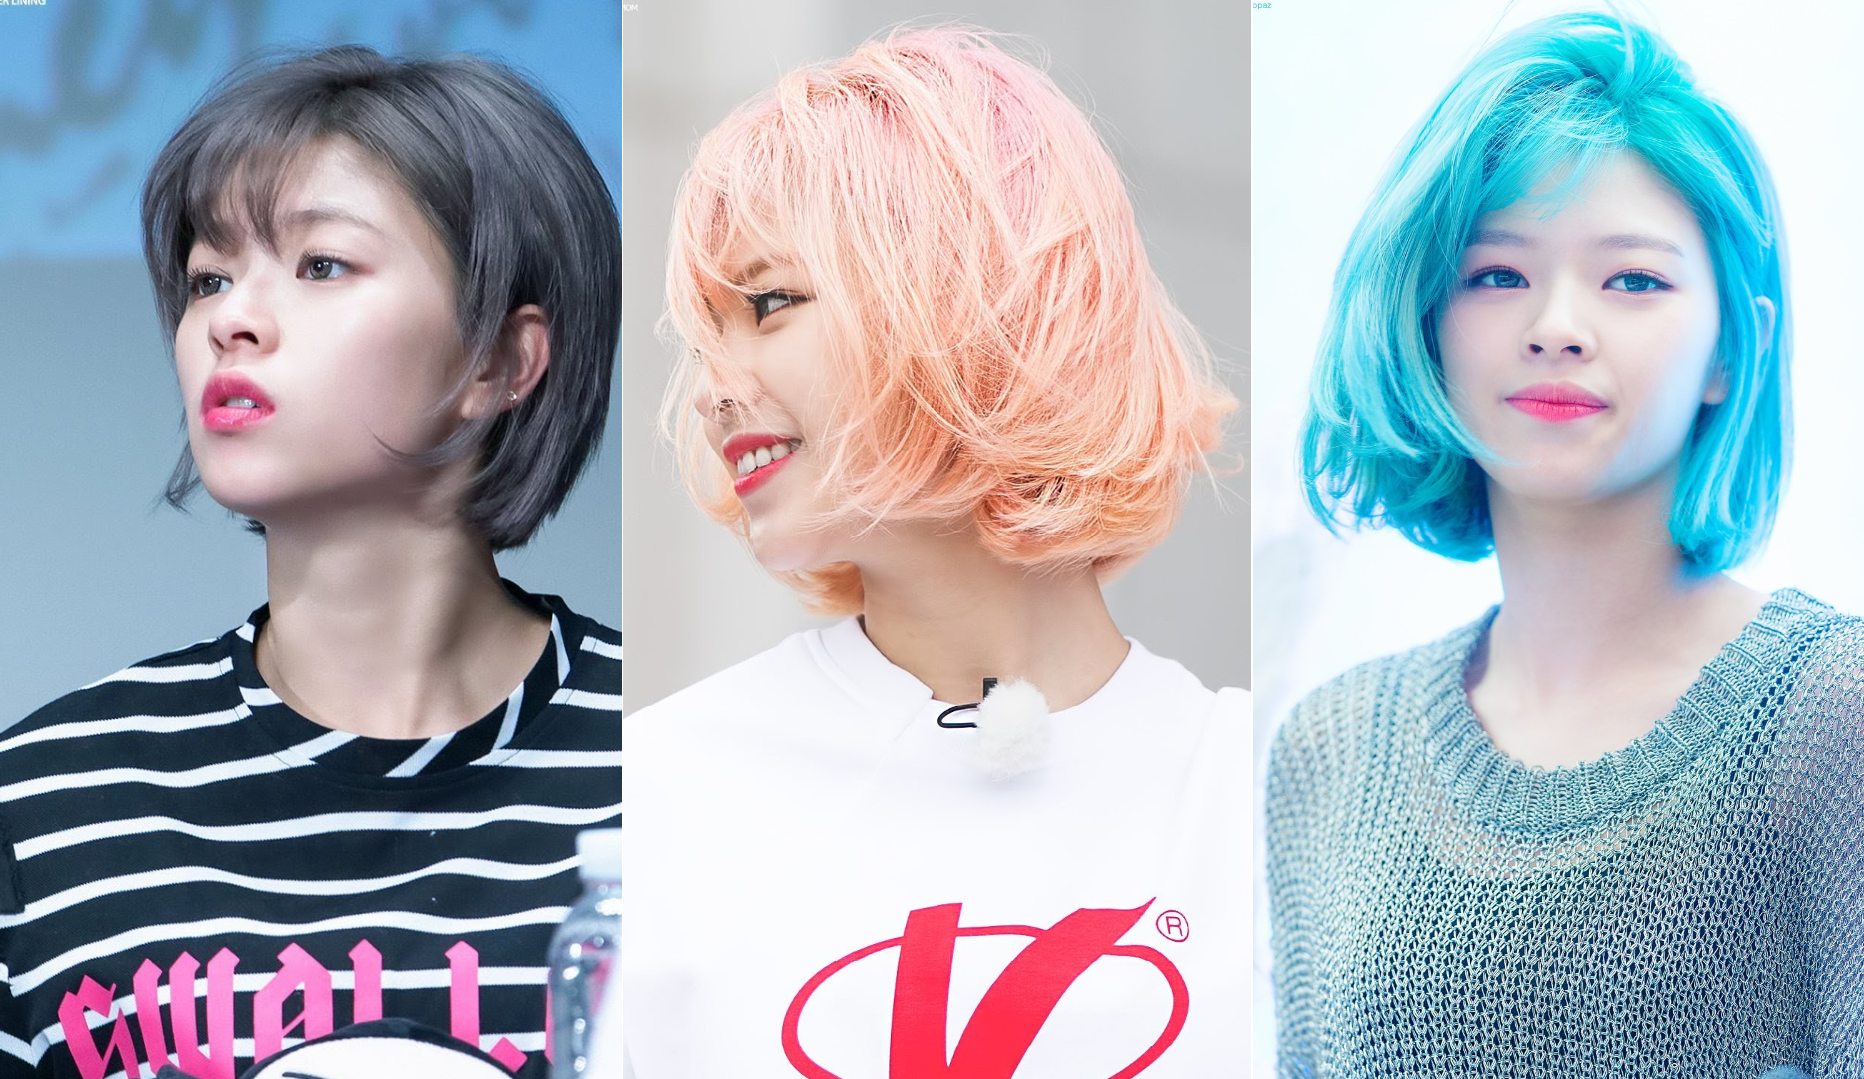 Twice’s Jeongyeon and her varied hair color fashion. 